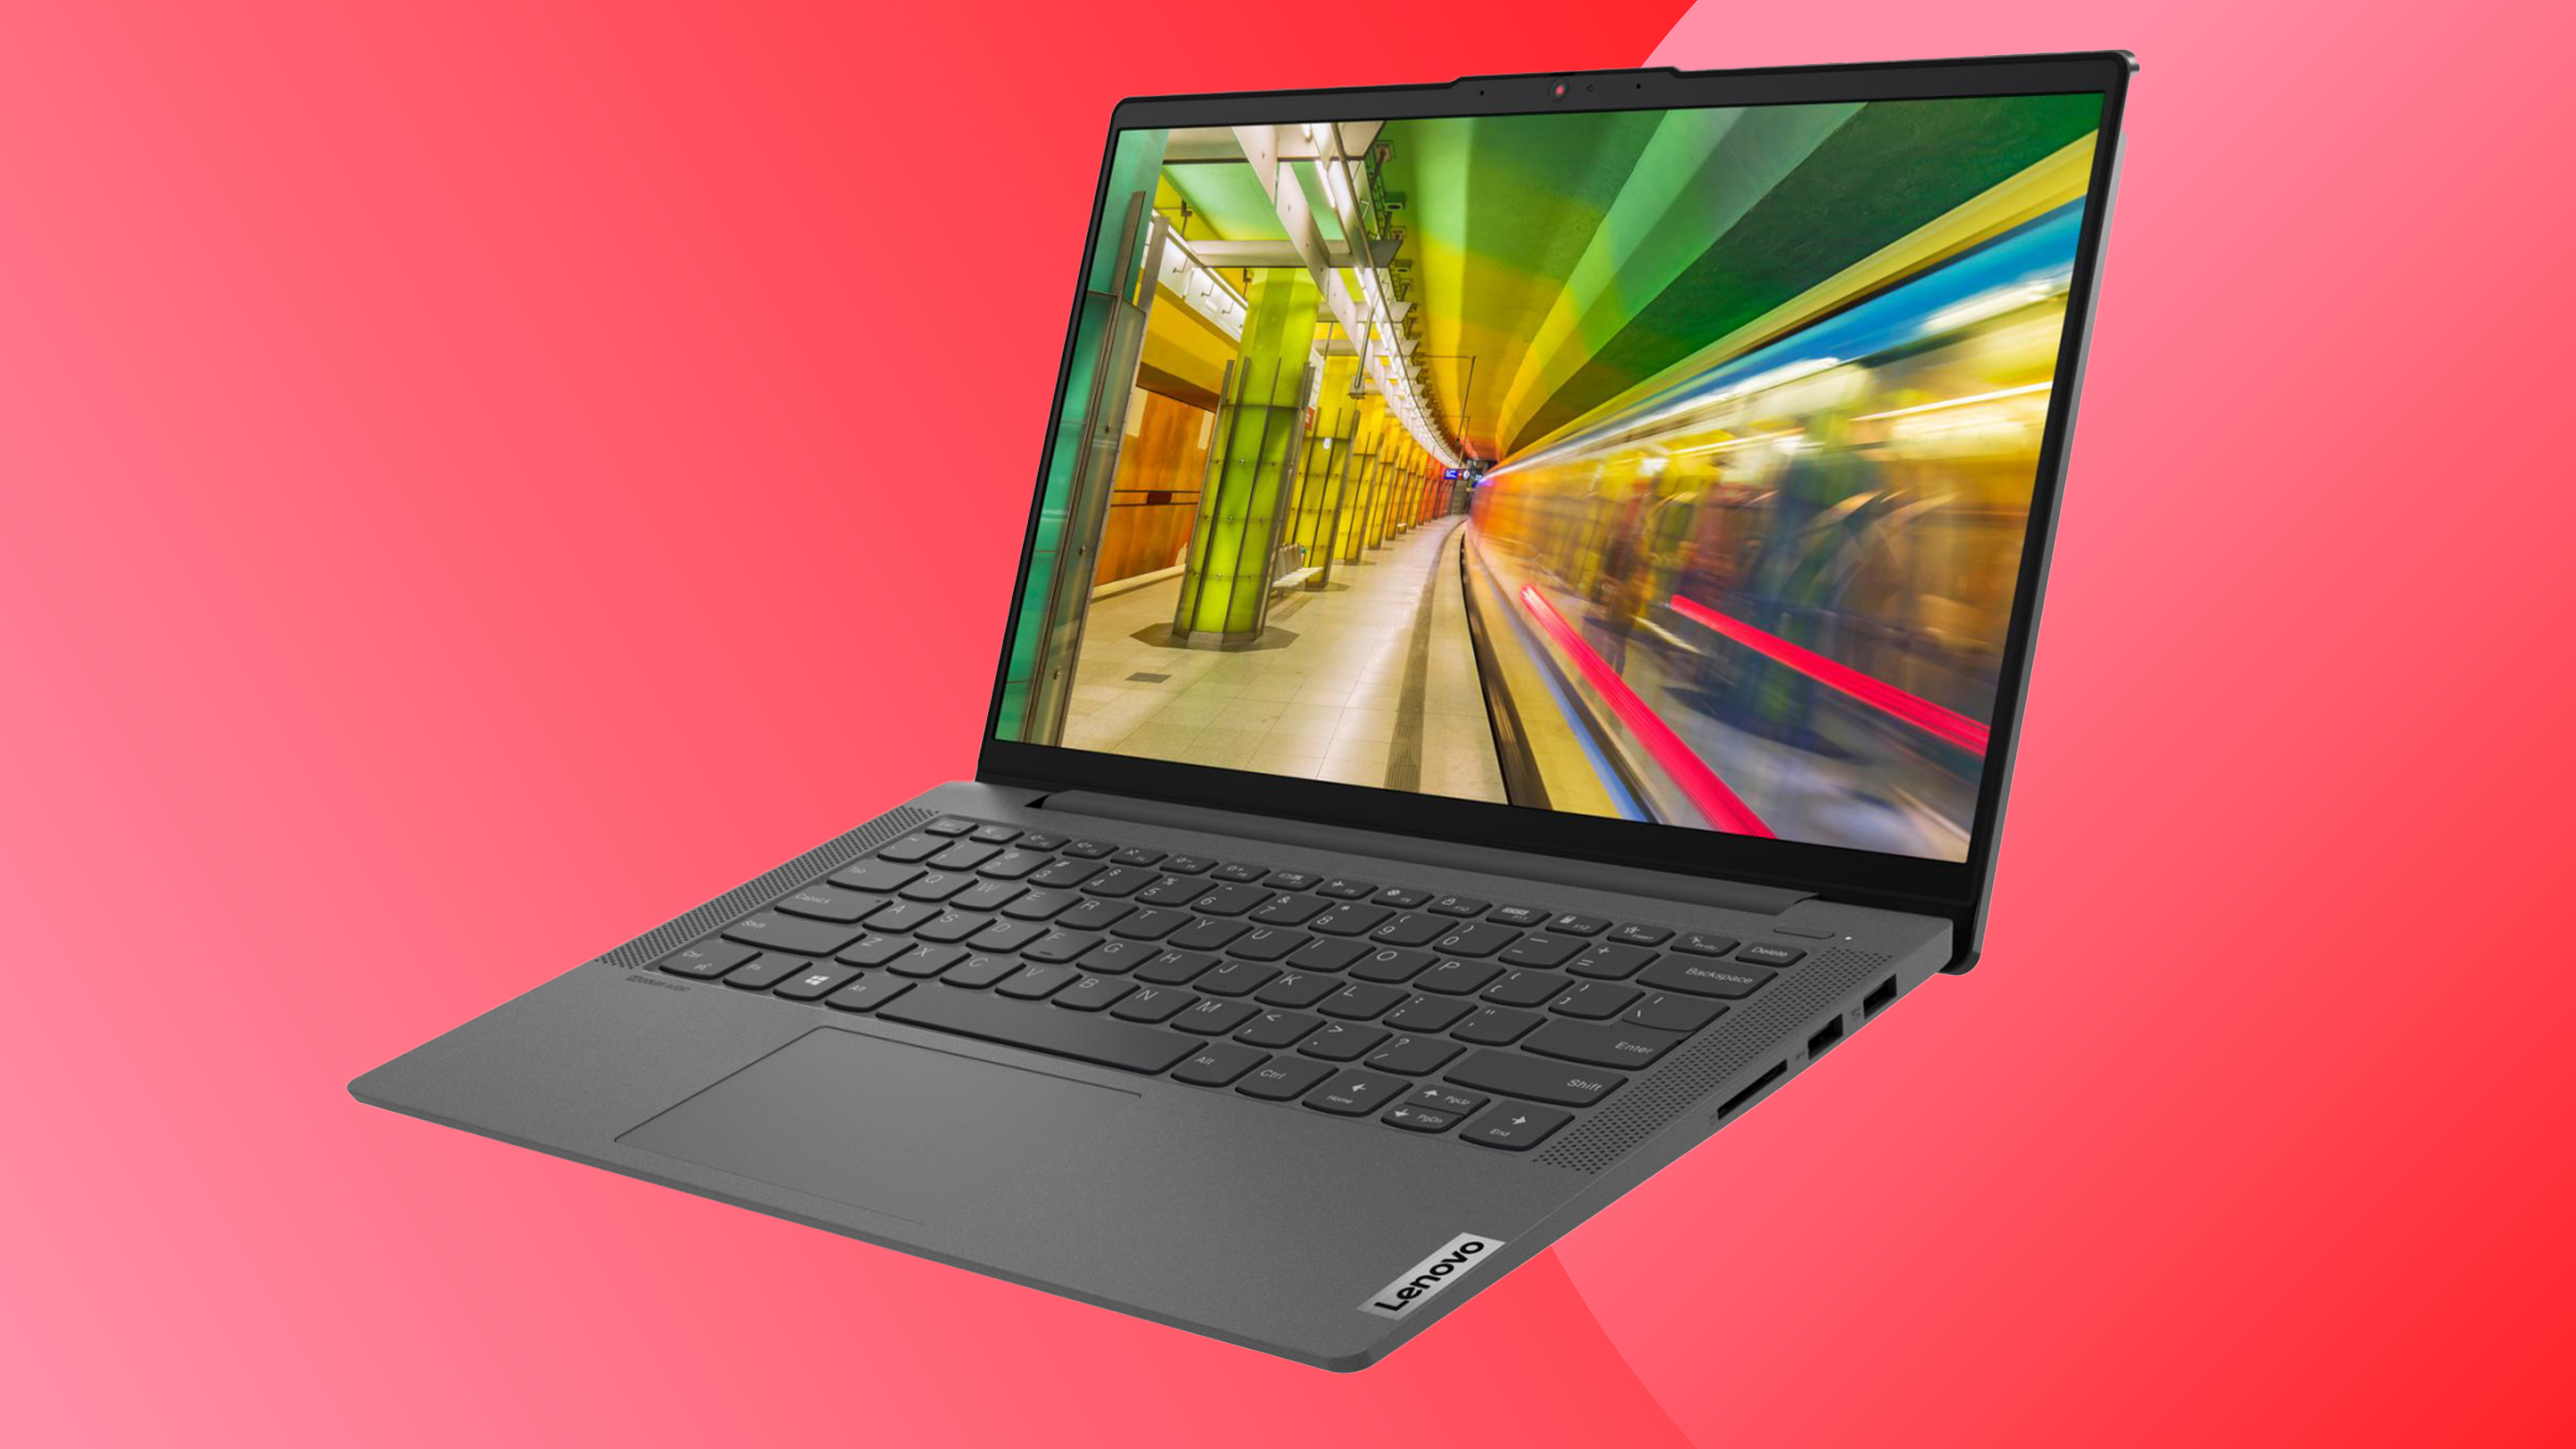 A Lenovo Black Friday deals image with a Lenovo Ideapad 5i on a red background